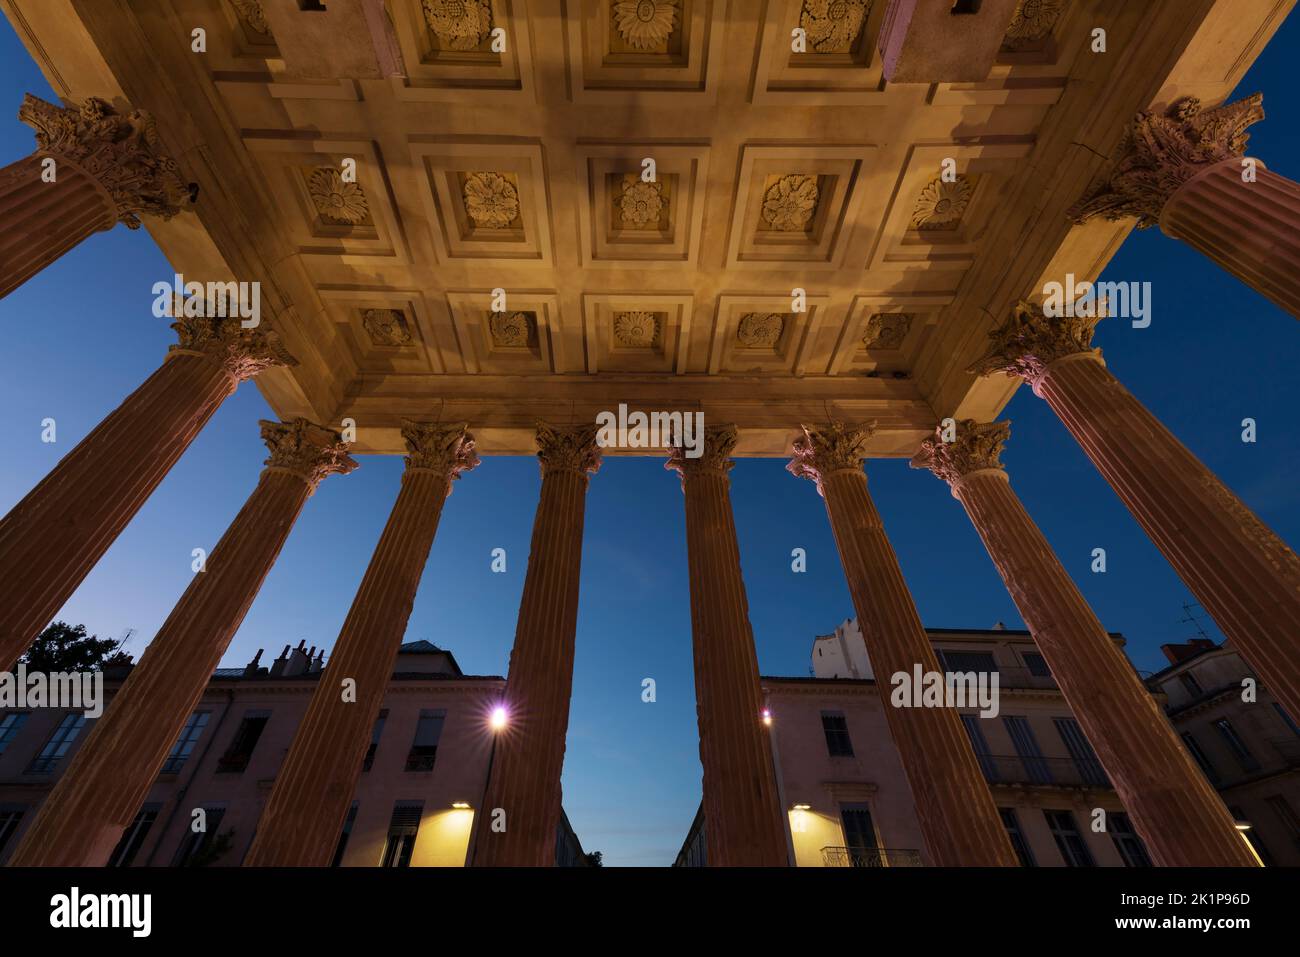 View from Maison Carree by night, raman temple in Nimes, France Stock Photo